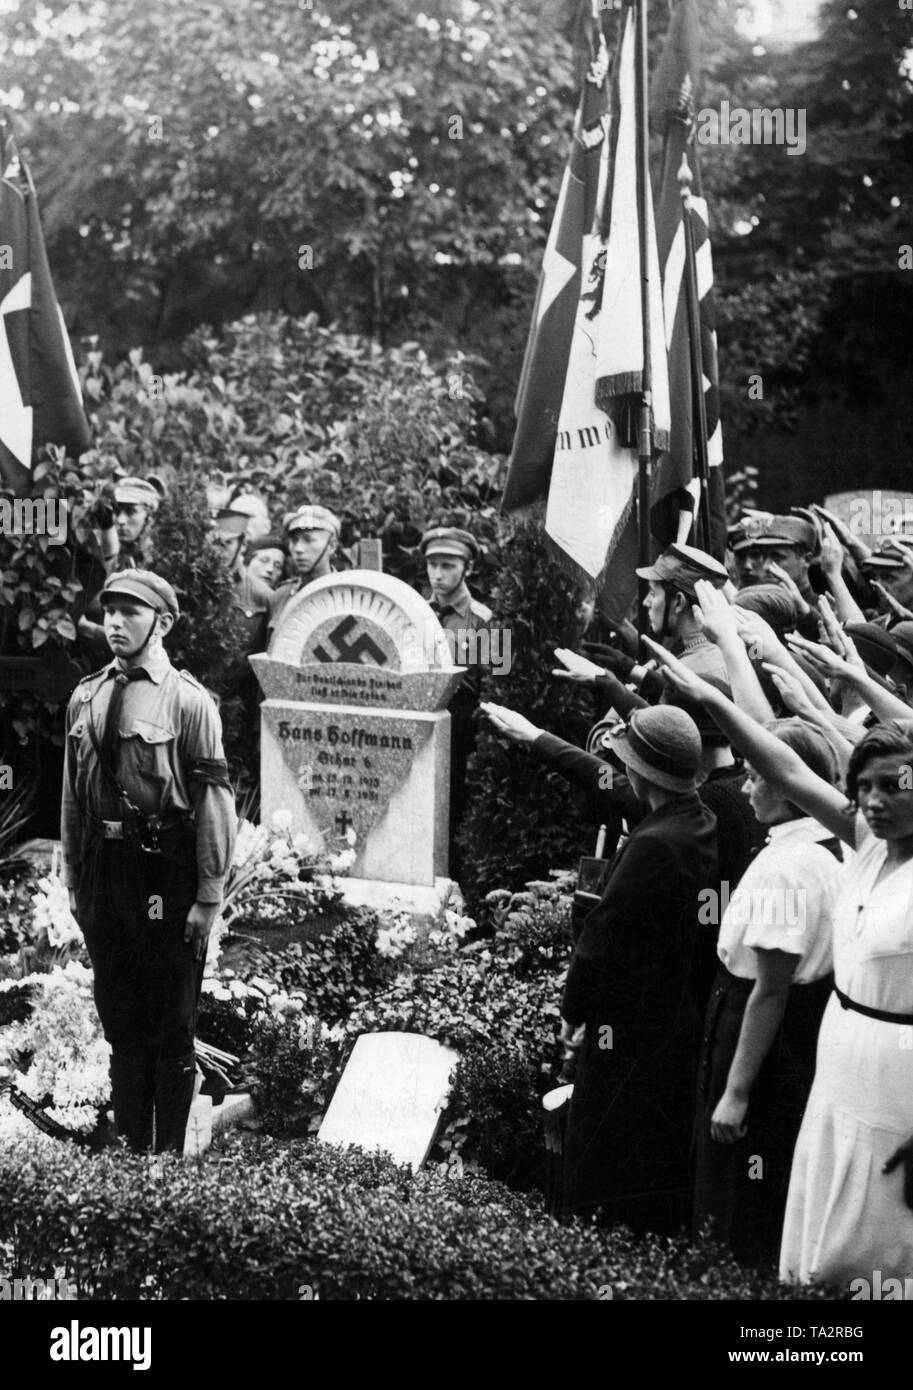 At the Alter Garnisonfriedhof Hasenheide at the Columbiadamm in Berlin-Neukoelln, a memorial stone was consecrated to the Hitlerjunge, Hans Hoffmann, who was killed on the Lausitzer Platz in Kreuzberg on August 17. Stock Photo